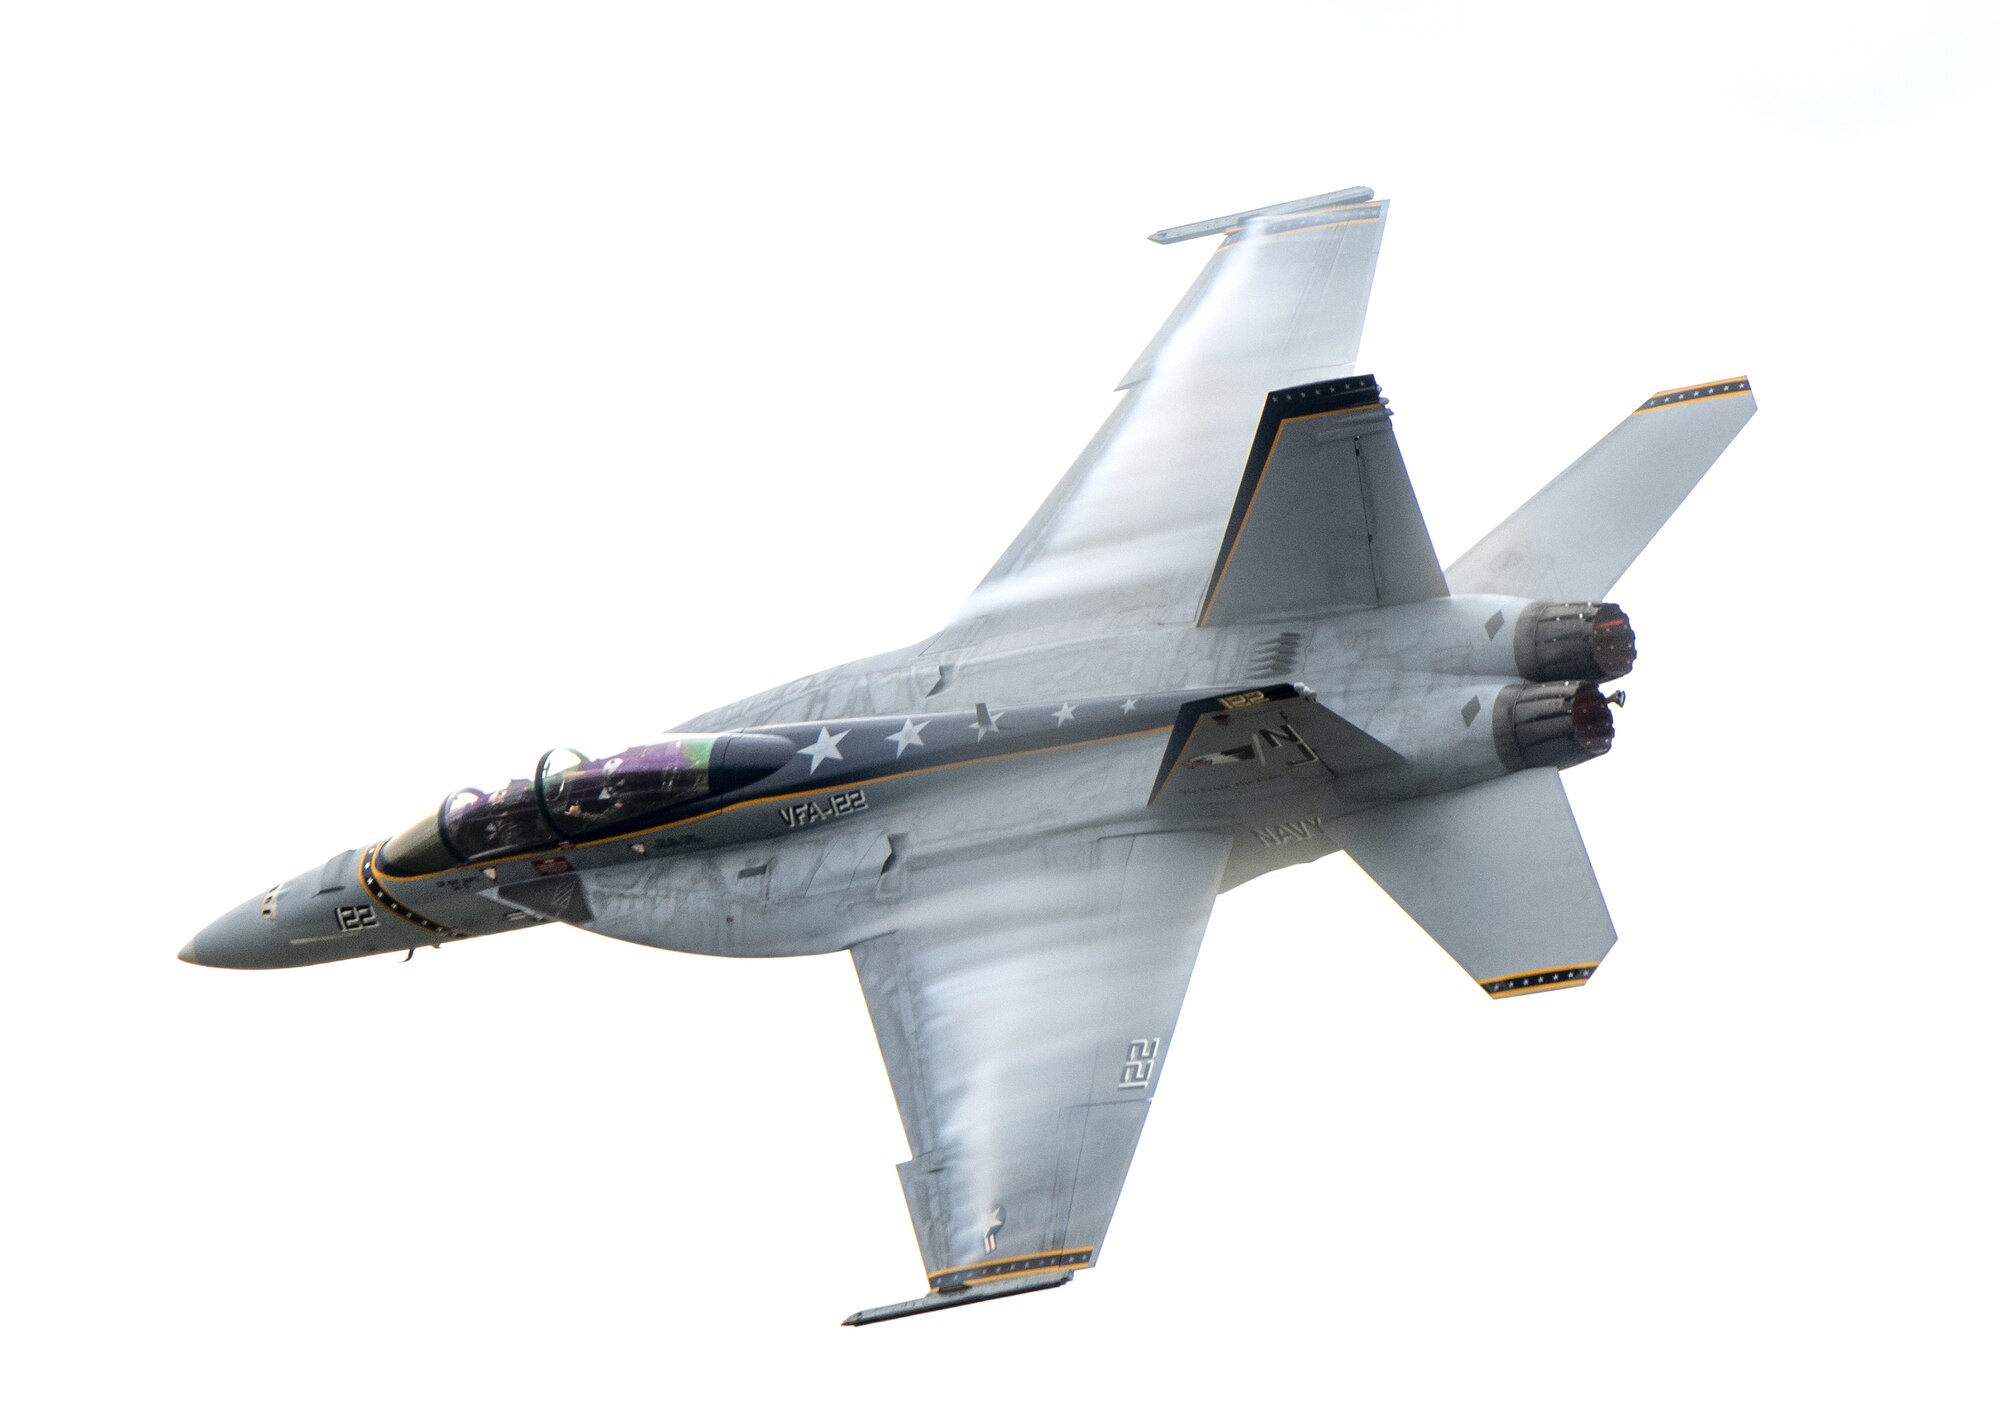 The U.S. Navy West Coast Rhino F-18 Superhornet Demo team performs during the Fairchild Skyfest 2022 airshow at Fairchild Air Force Base, Washington, May 14, 2022. Fairchild Skyfest 2022 included the West Coast Rhino F/A-18 Demo team, showcasing the capabilities of the U.S. Air Force’s joint partners in assuring air superiority. (U.S. Air Force photo by Staff Sgt. Lawrence Sena)